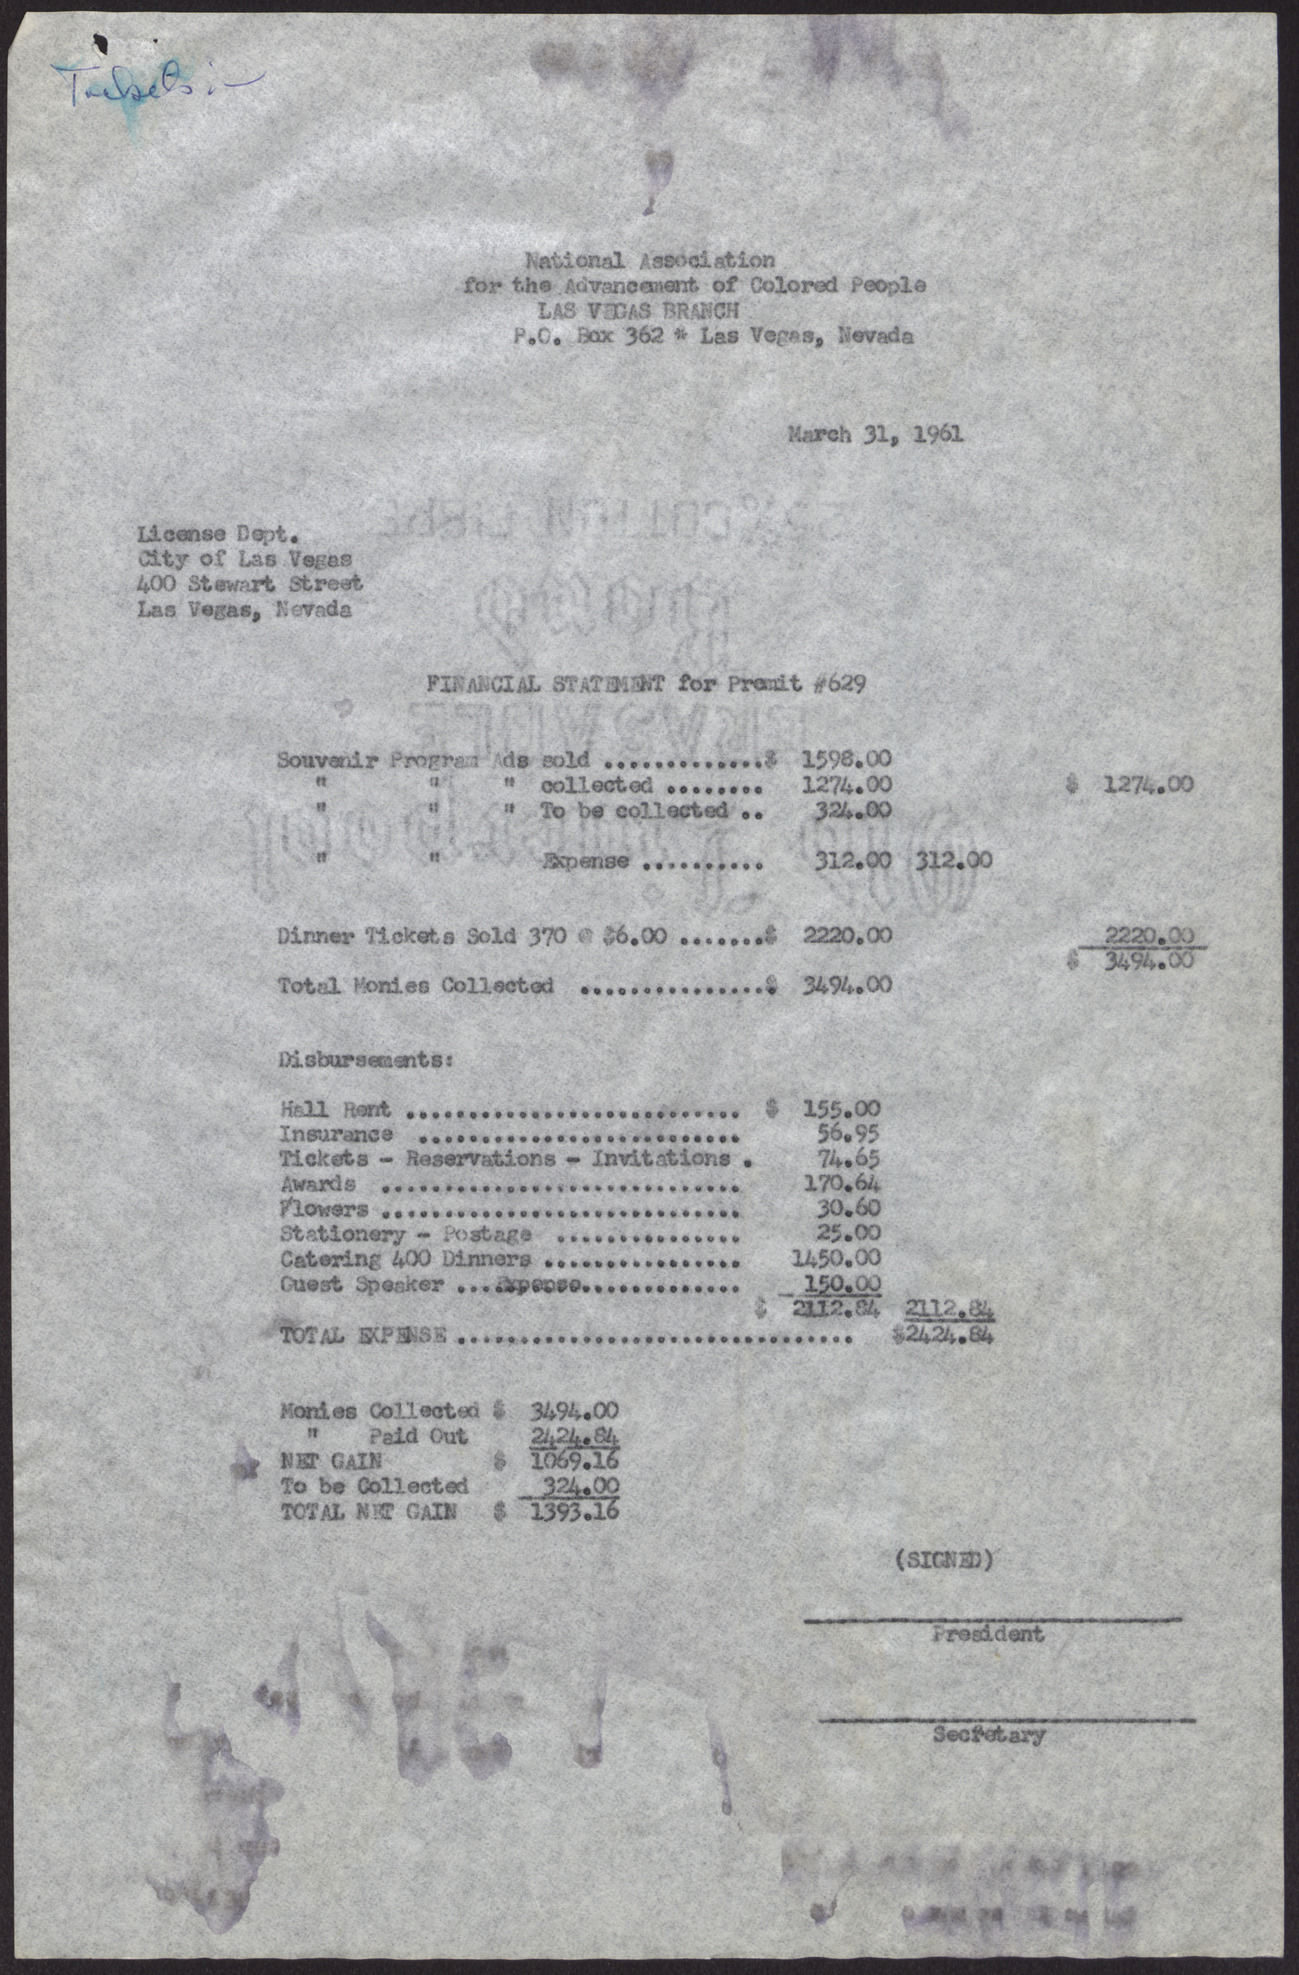 NAACP Las Vegas Branch Financial Statement for Permit "629," March 31, 1961